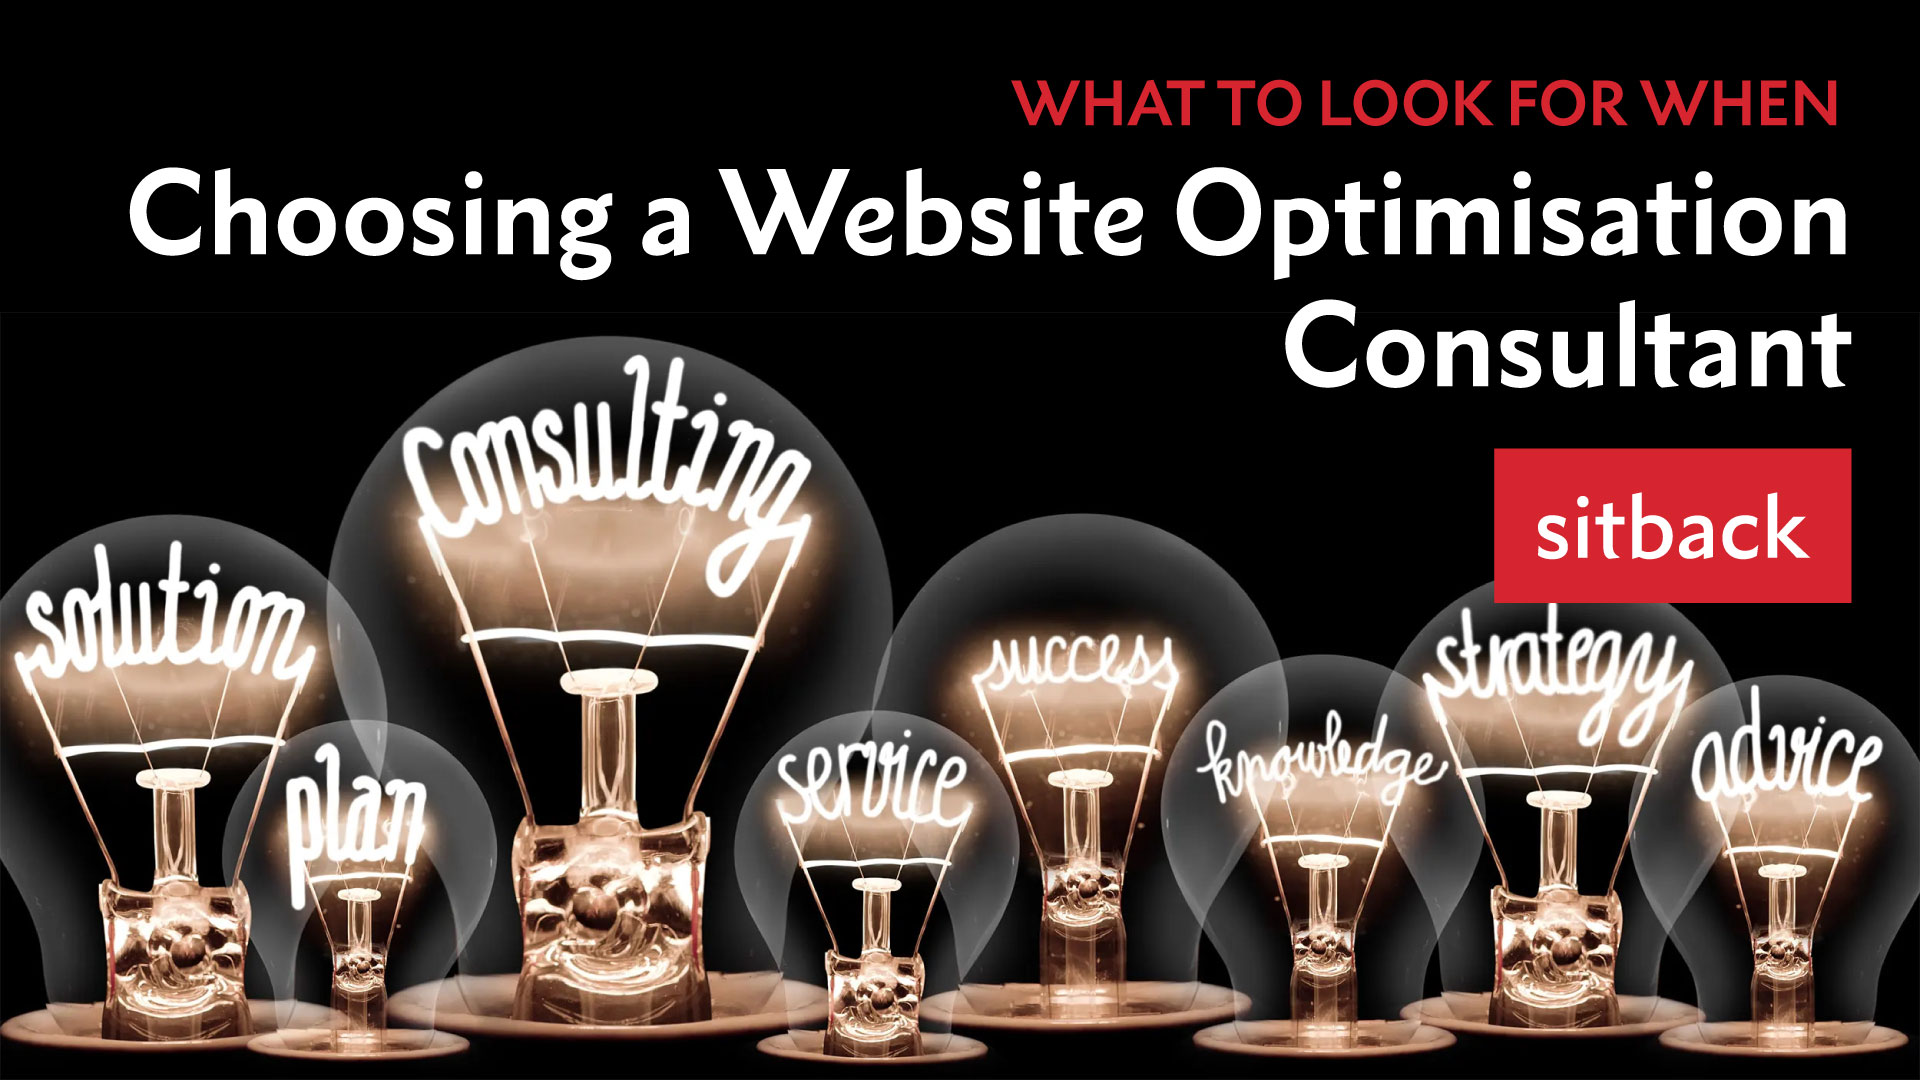 What to Look for When Choosing a Website Optimisation Consultant